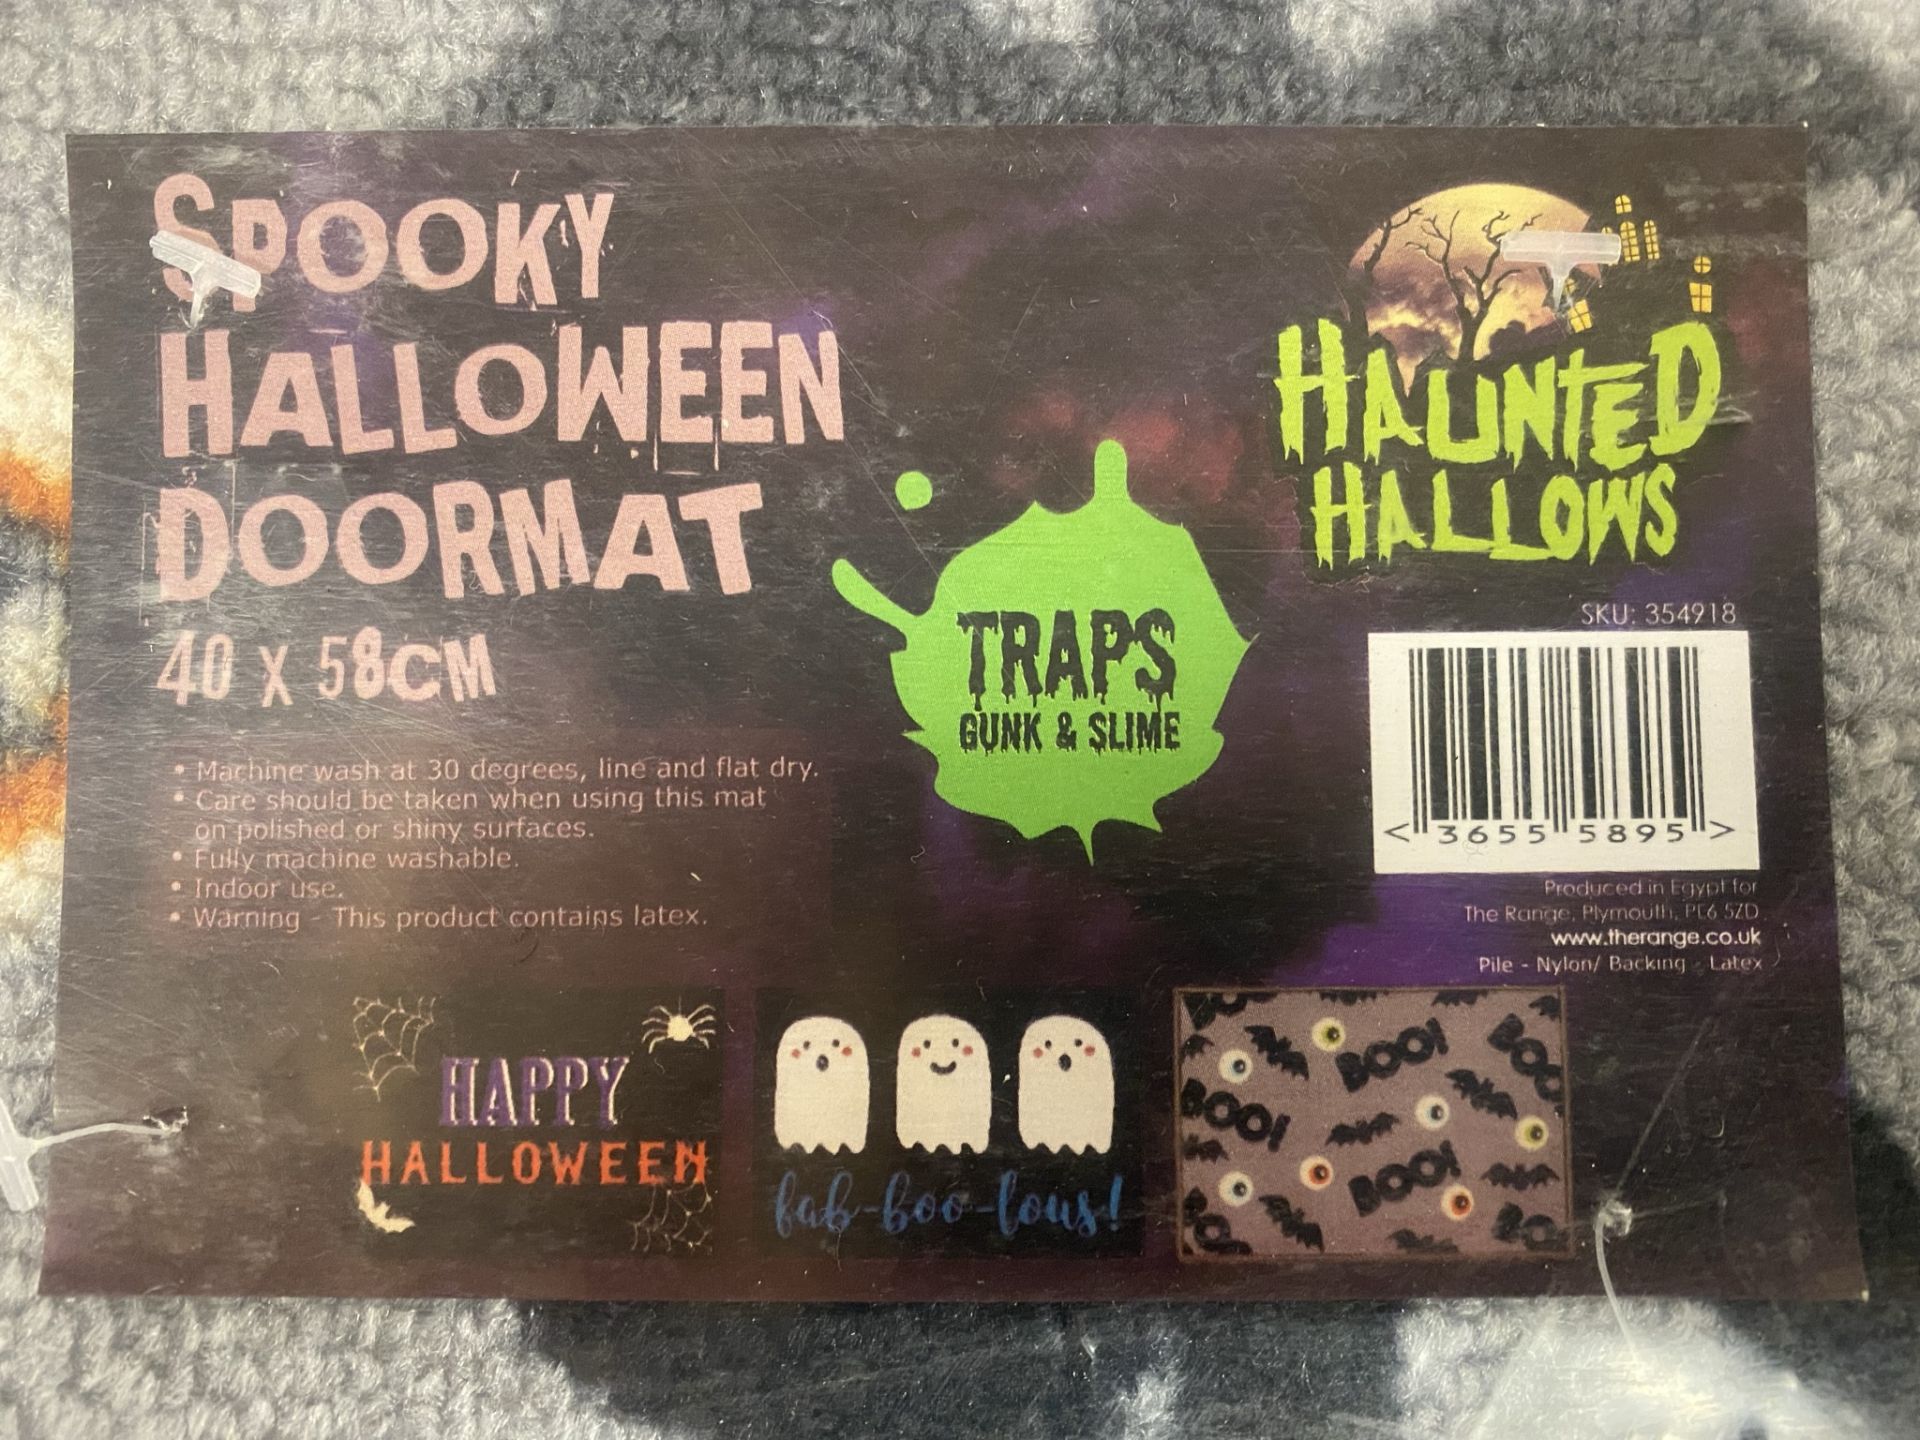 15 x Spooky Halloween Doormats - 40cm x 58cm - sealed pack contains 3 different designs - Image 2 of 3